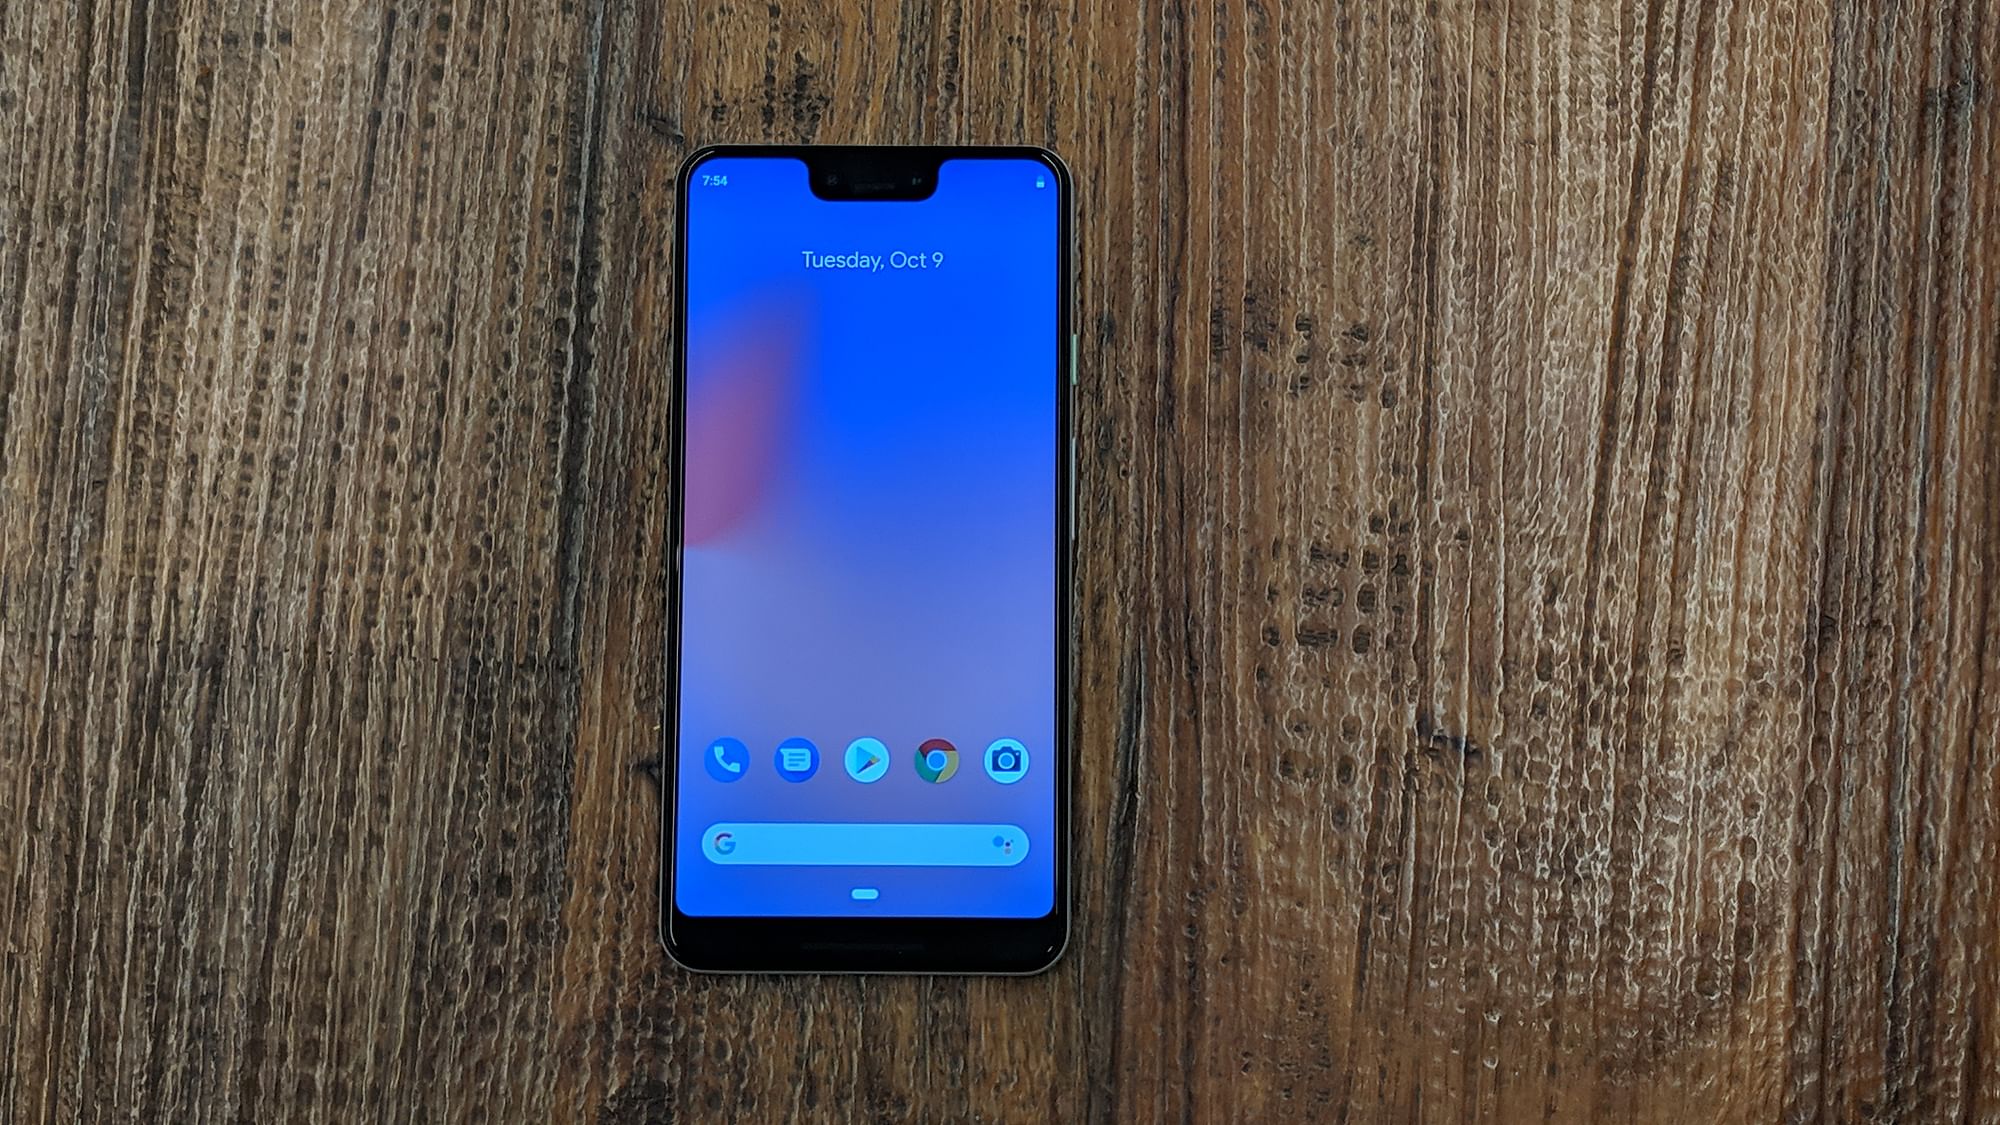 Google Pixel 3 XL gets an OLED screen from Samsung this year.&nbsp;